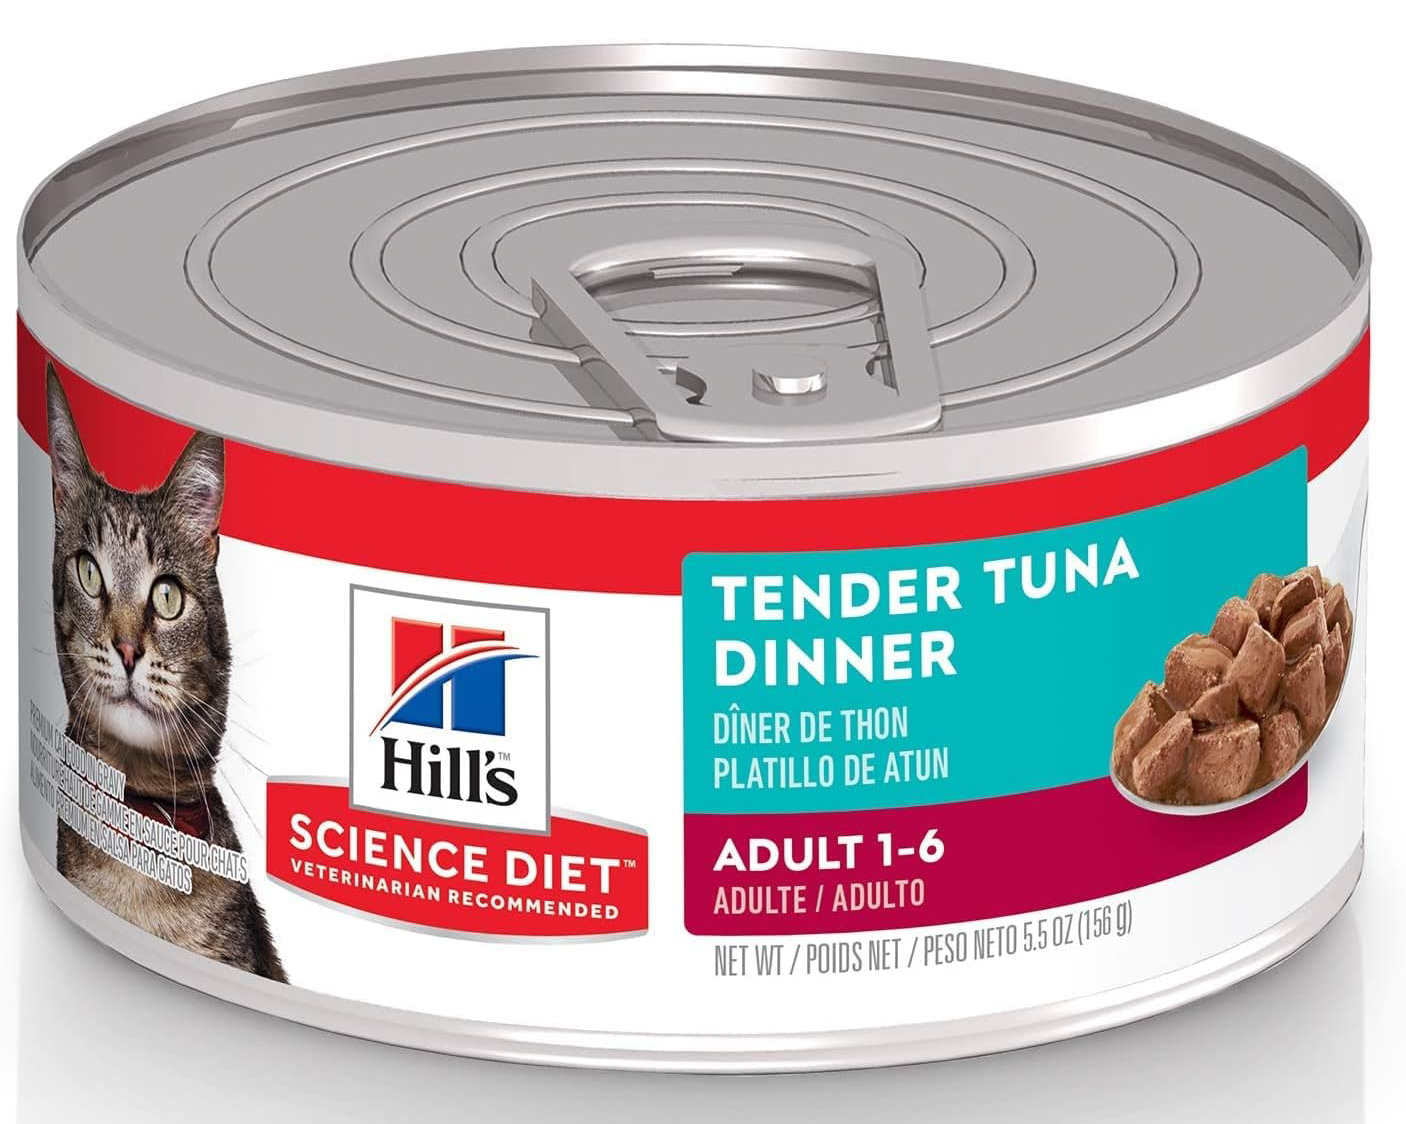 Hill's Science Diet Adult Canned Cat Food, Tender Tuna Dinner